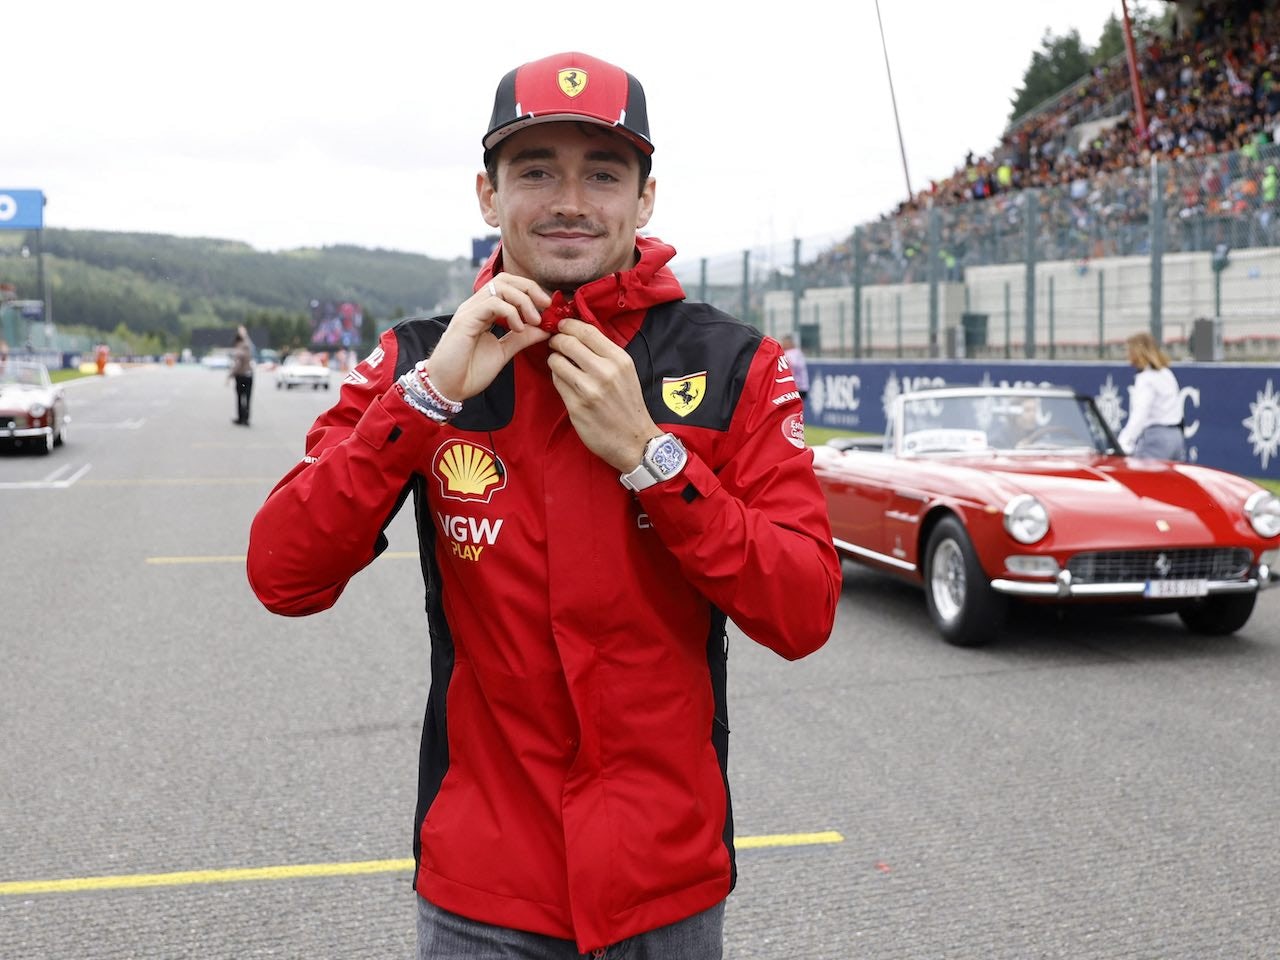 Contract talks not even started - Leclerc